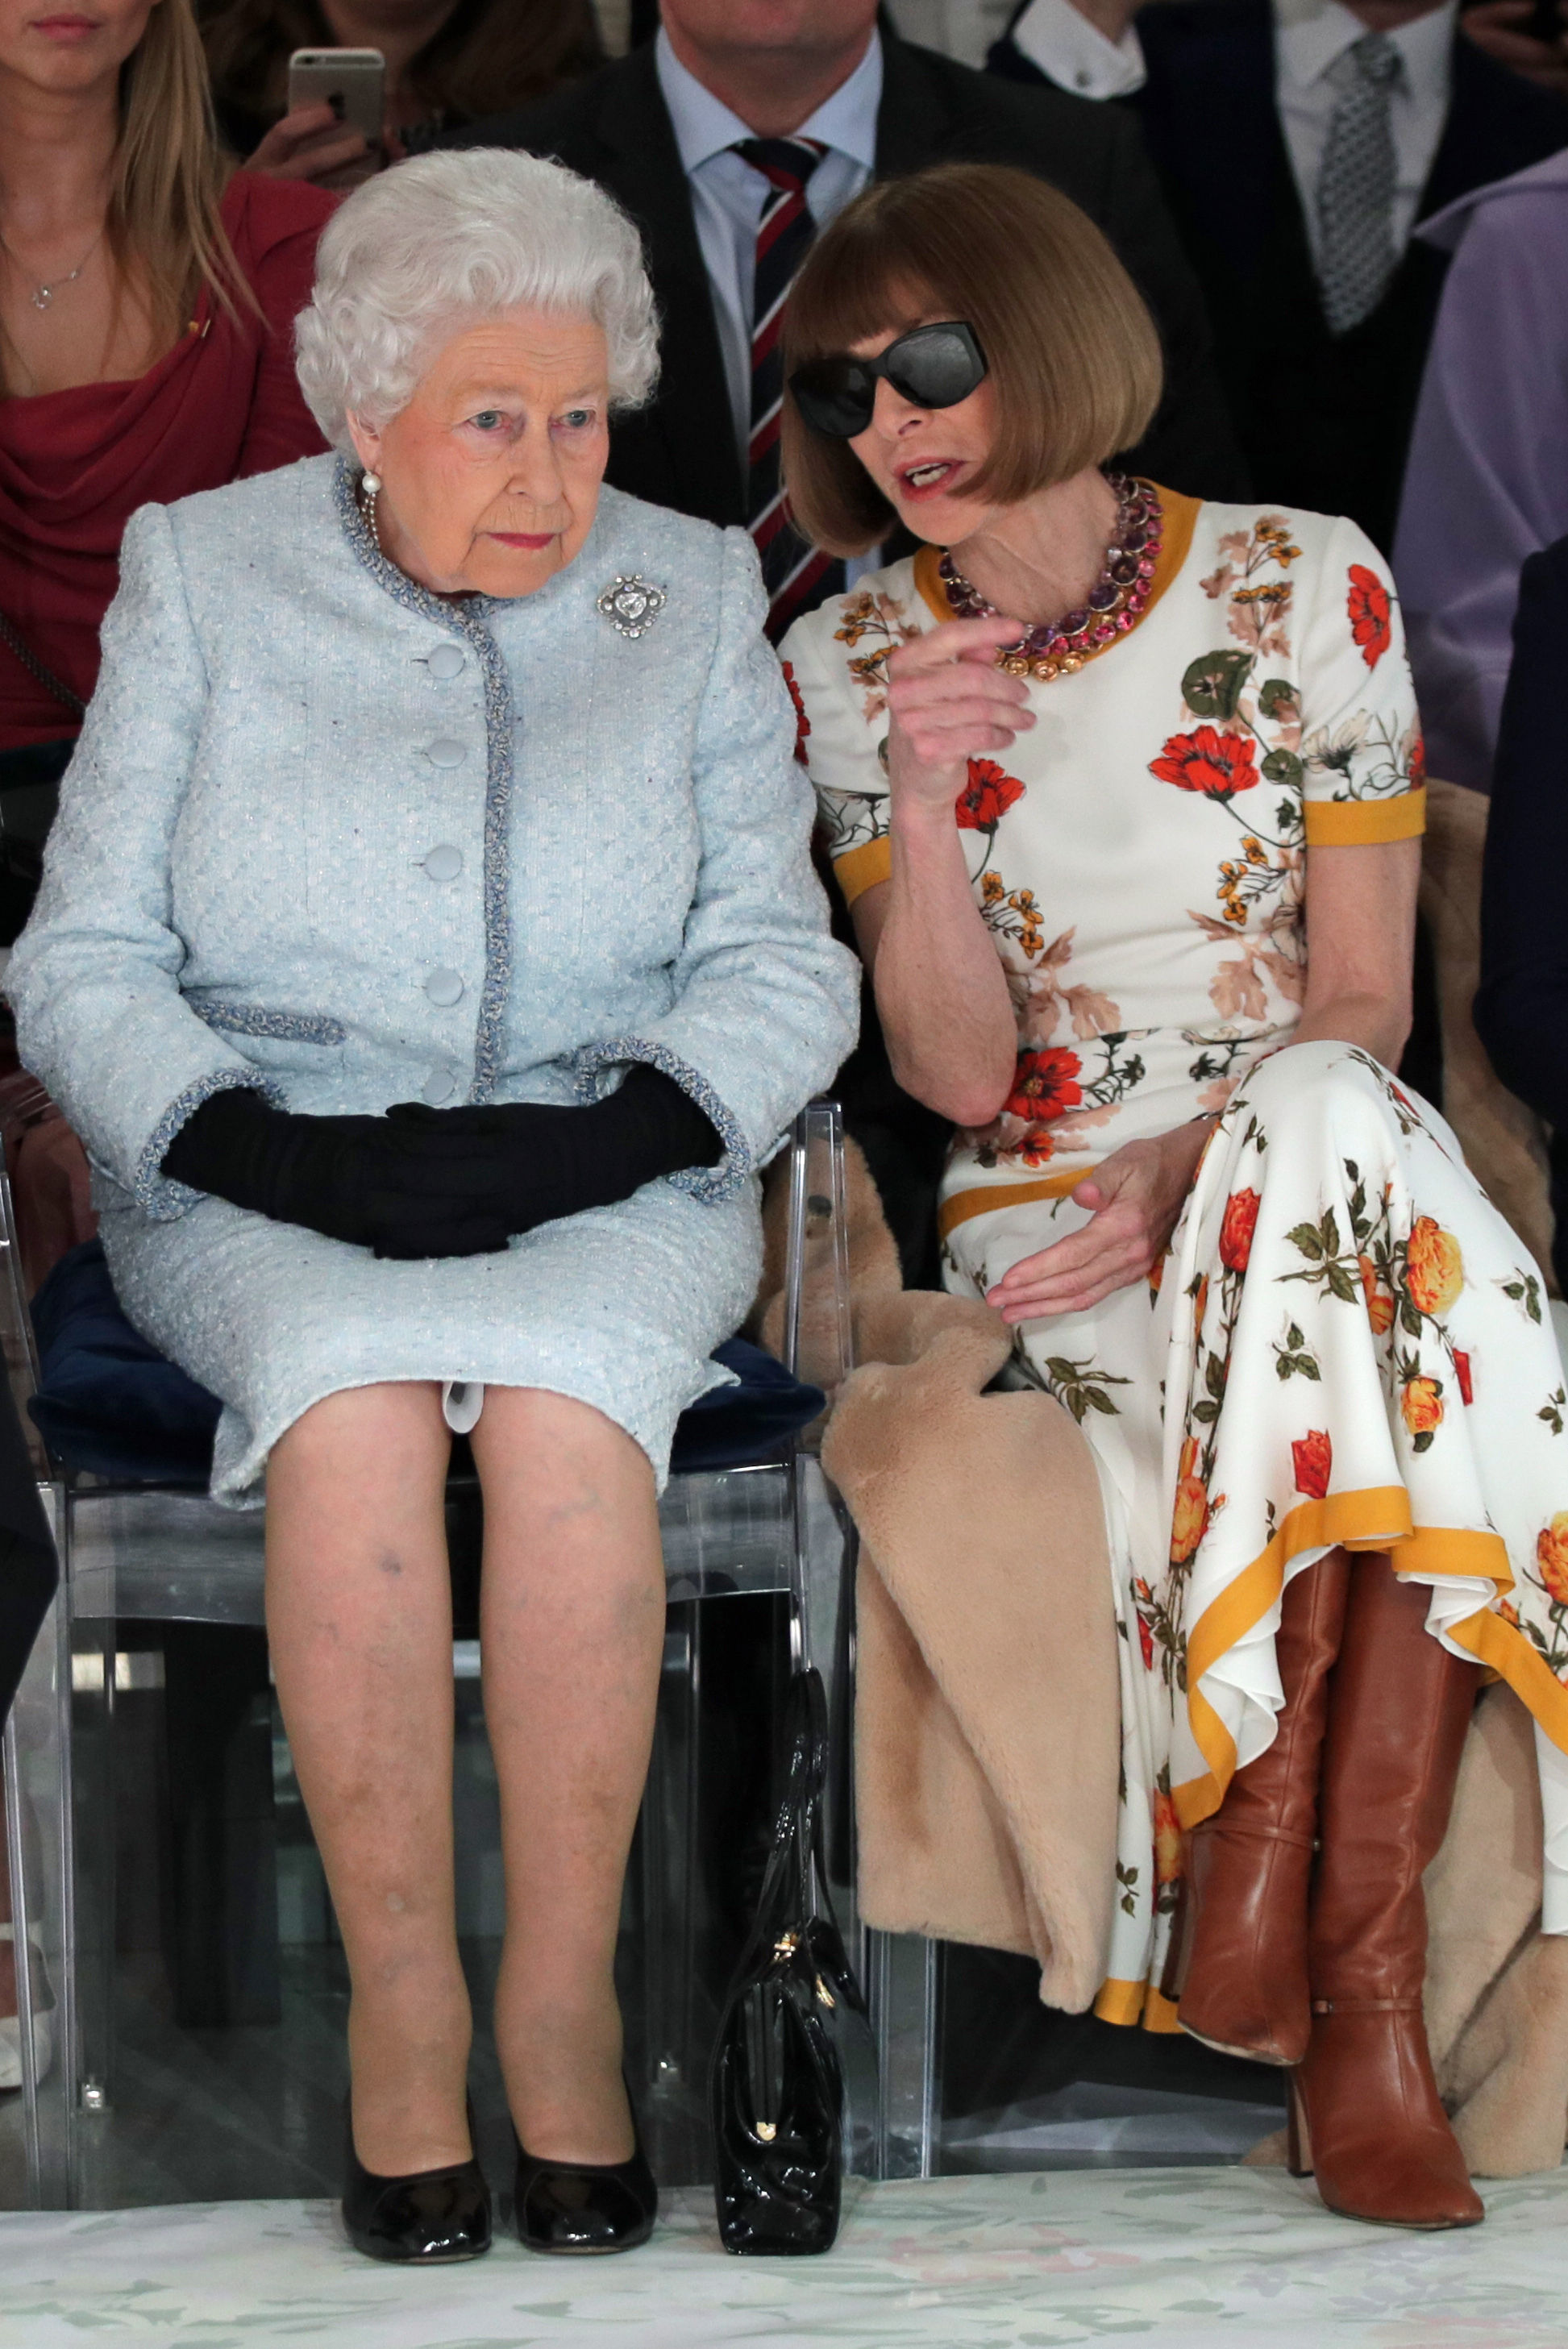 The Queen sits next to Anna Wintour, who is speaking